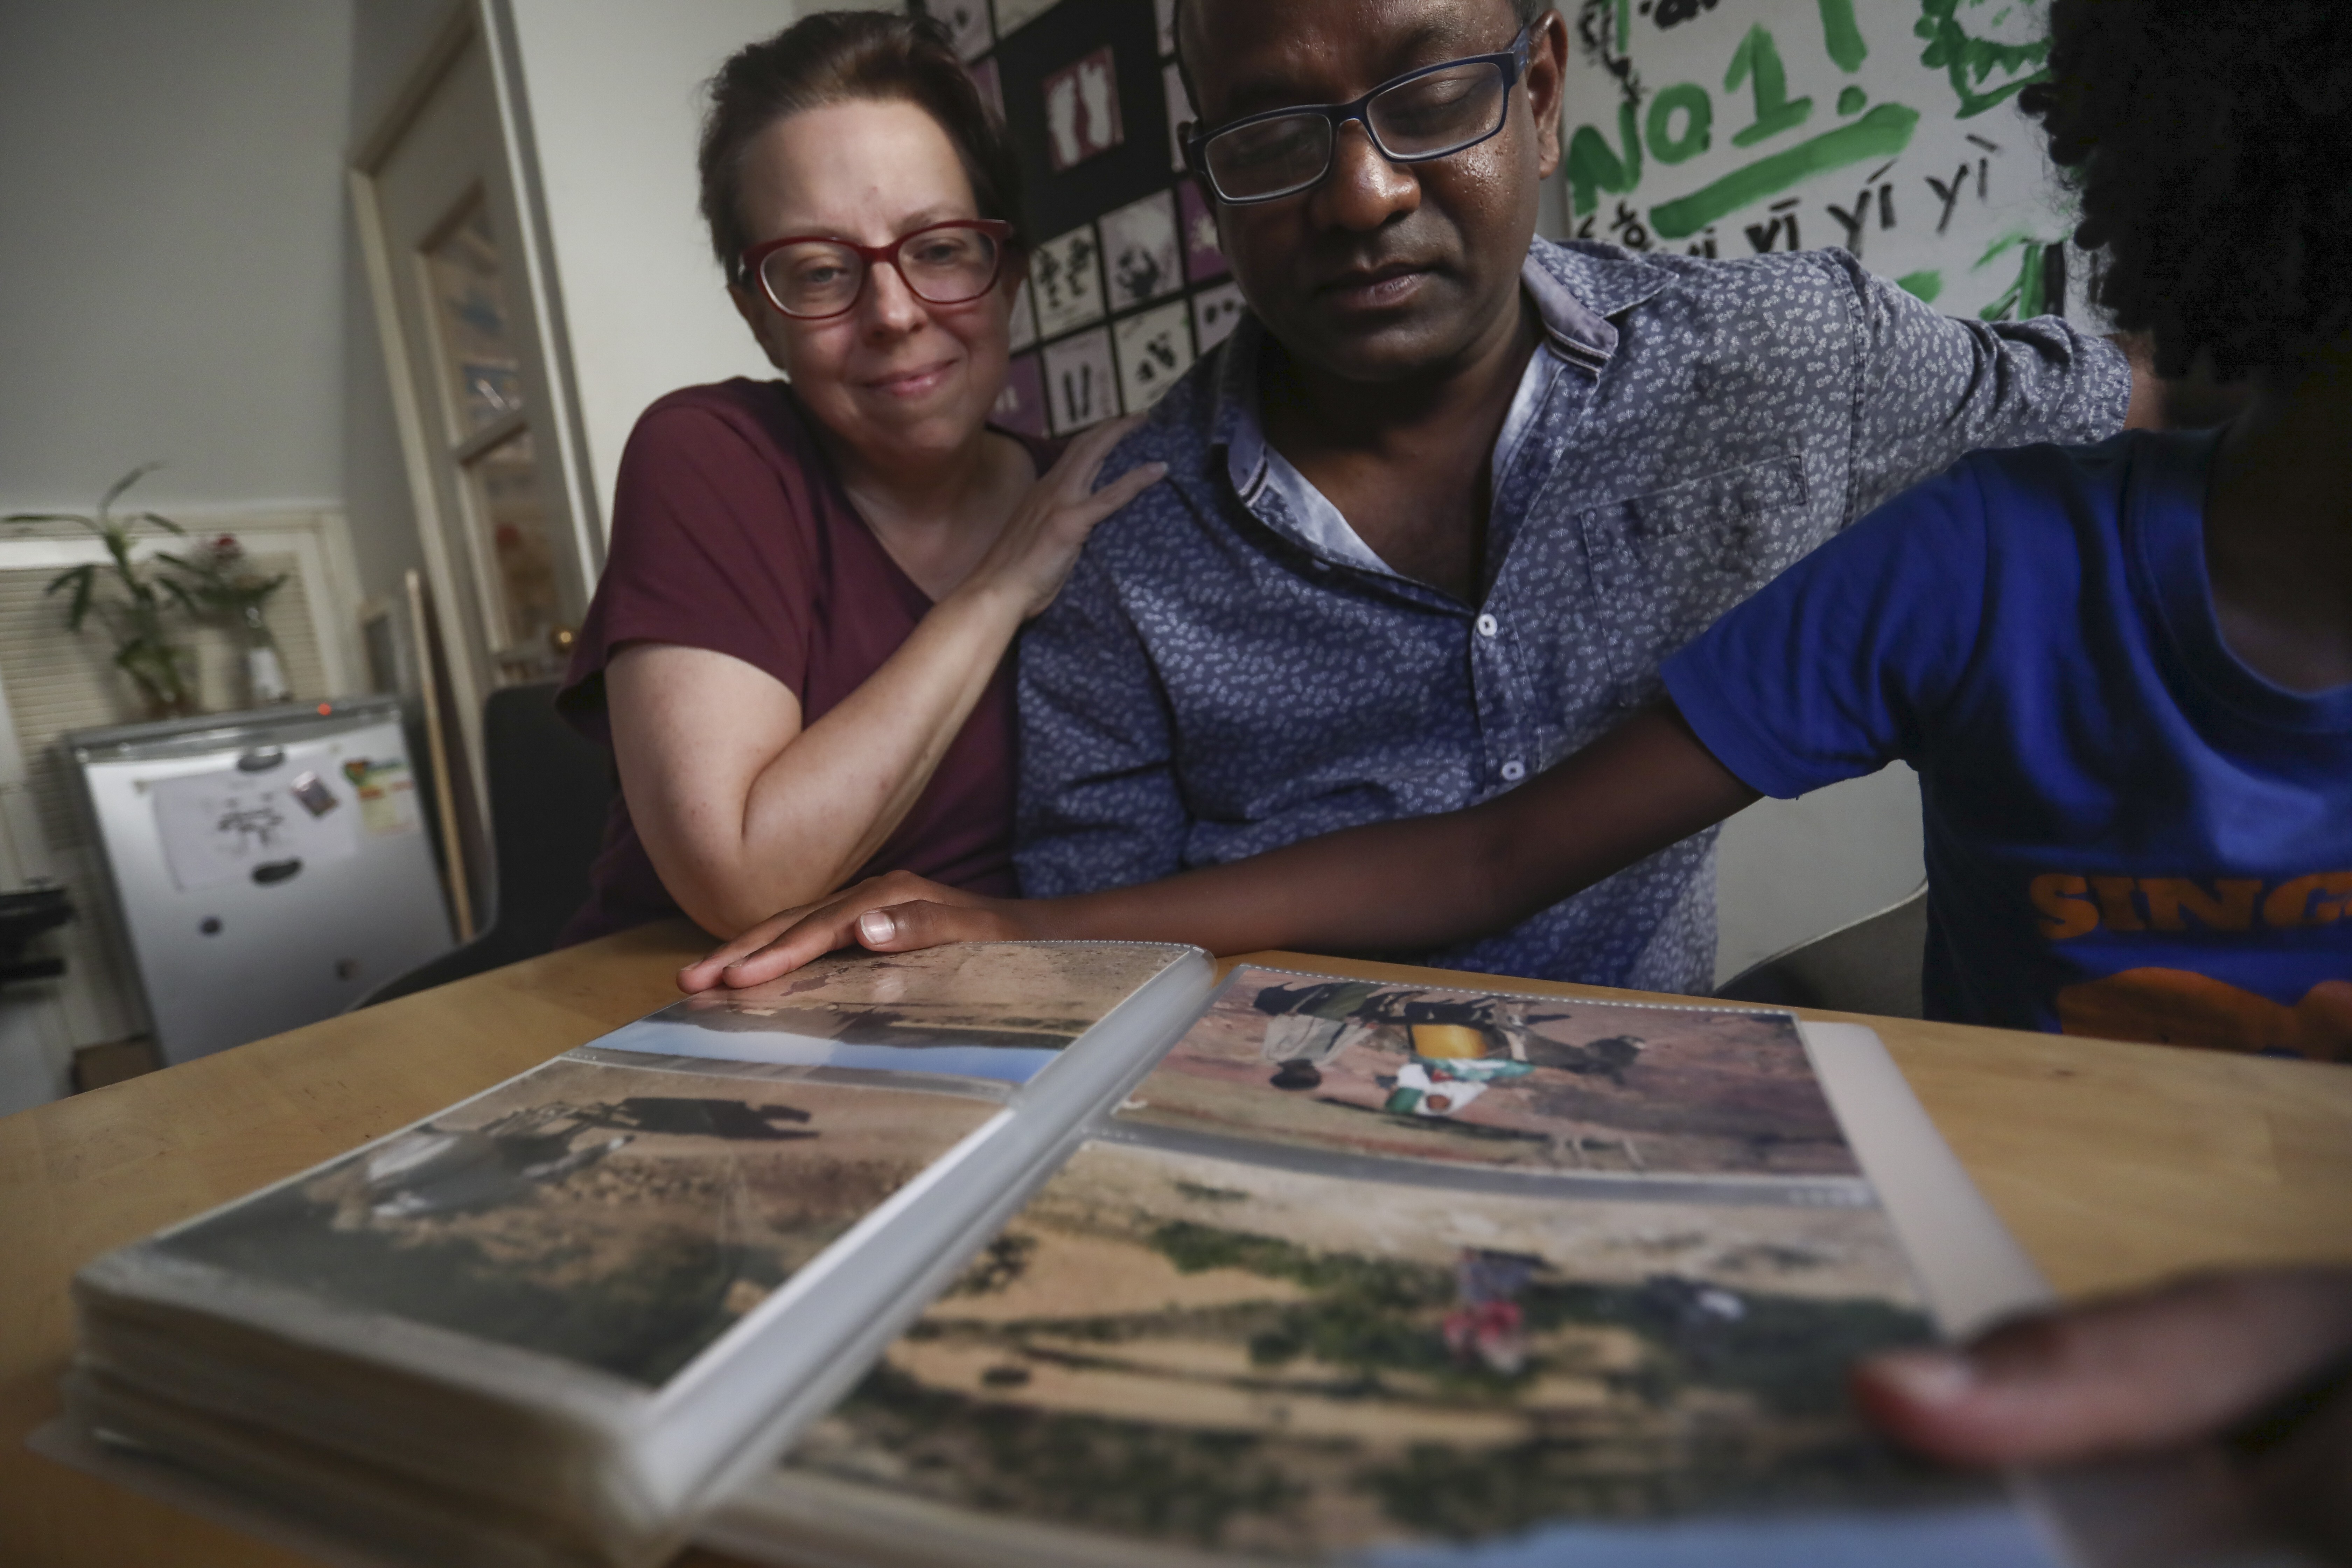 Karen Arndt (left) and Chris Prosper, with their 10-year-old son, who was adopted from Ethiopia’s Tigray region, look through their photo album, in their home in Shek O. Photo: Jonathan Wong